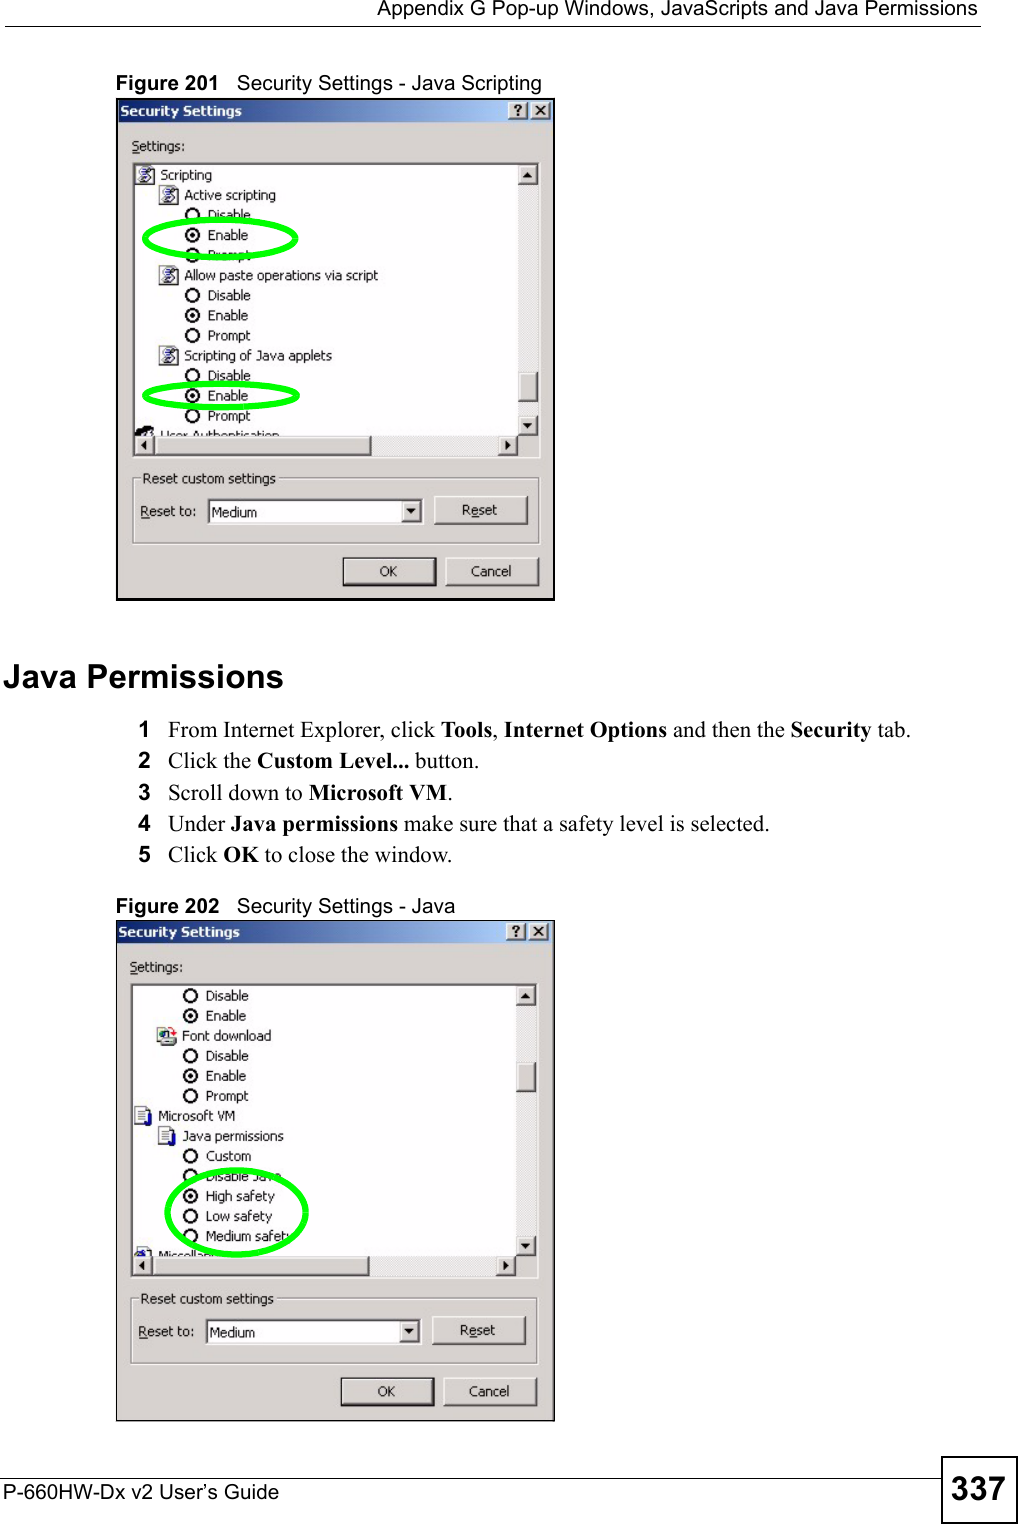  Appendix G Pop-up Windows, JavaScripts and Java PermissionsP-660HW-Dx v2 User’s Guide 337Figure 201   Security Settings - Java ScriptingJava Permissions1From Internet Explorer, click Tools, Internet Options and then the Security tab. 2Click the Custom Level... button. 3Scroll down to Microsoft VM. 4Under Java permissions make sure that a safety level is selected.5Click OK to close the window.Figure 202   Security Settings - Java 